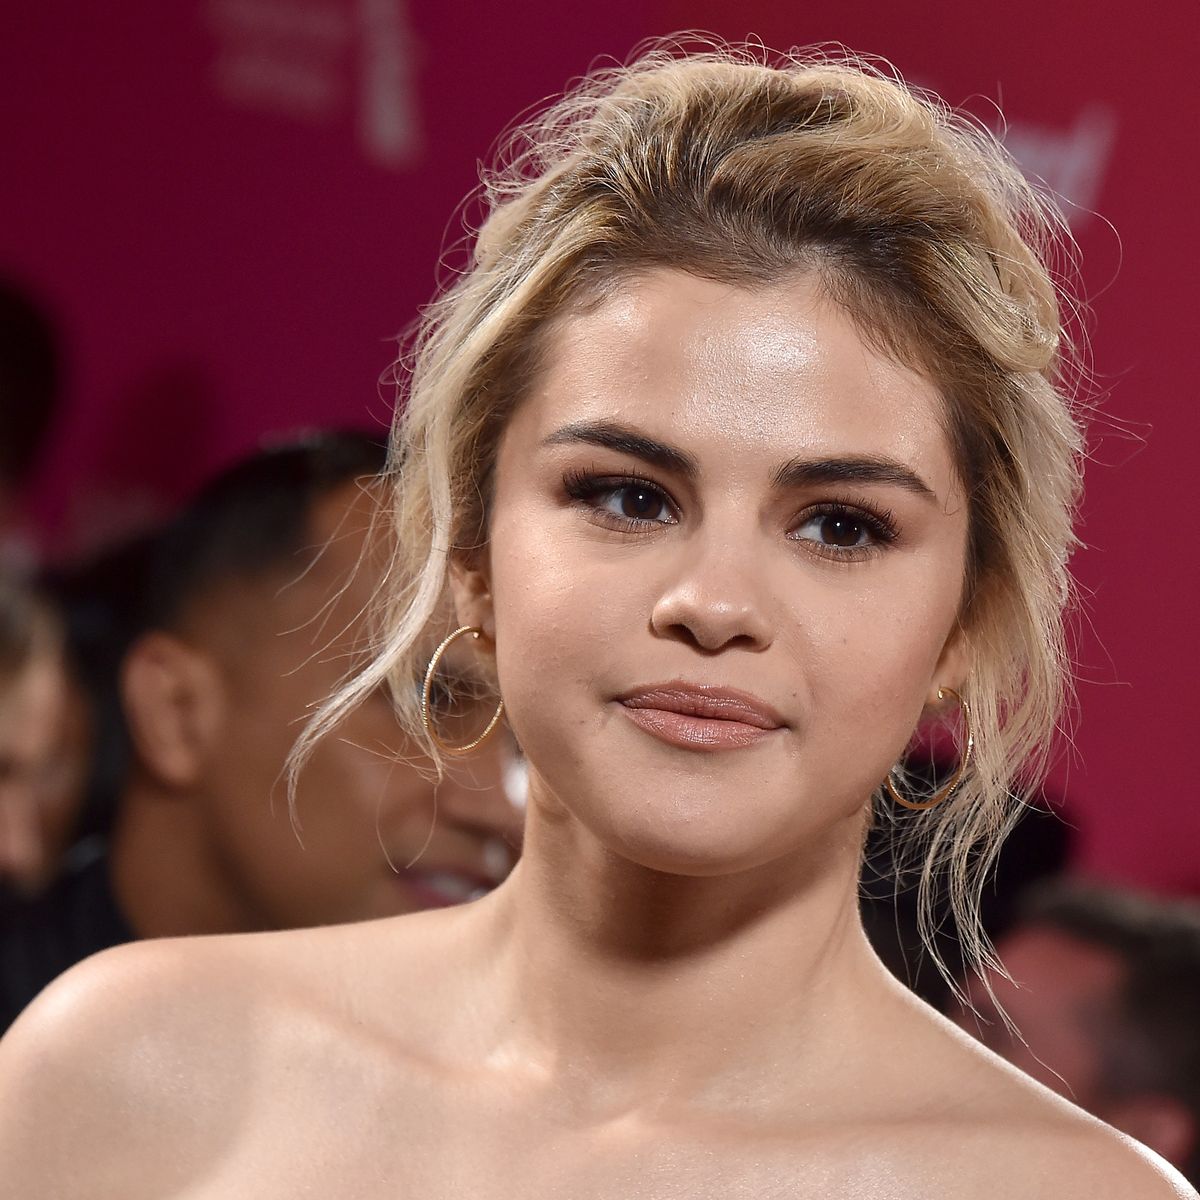 Selena Gomez: I Didn't Feel Good About My Body at This Met Gala